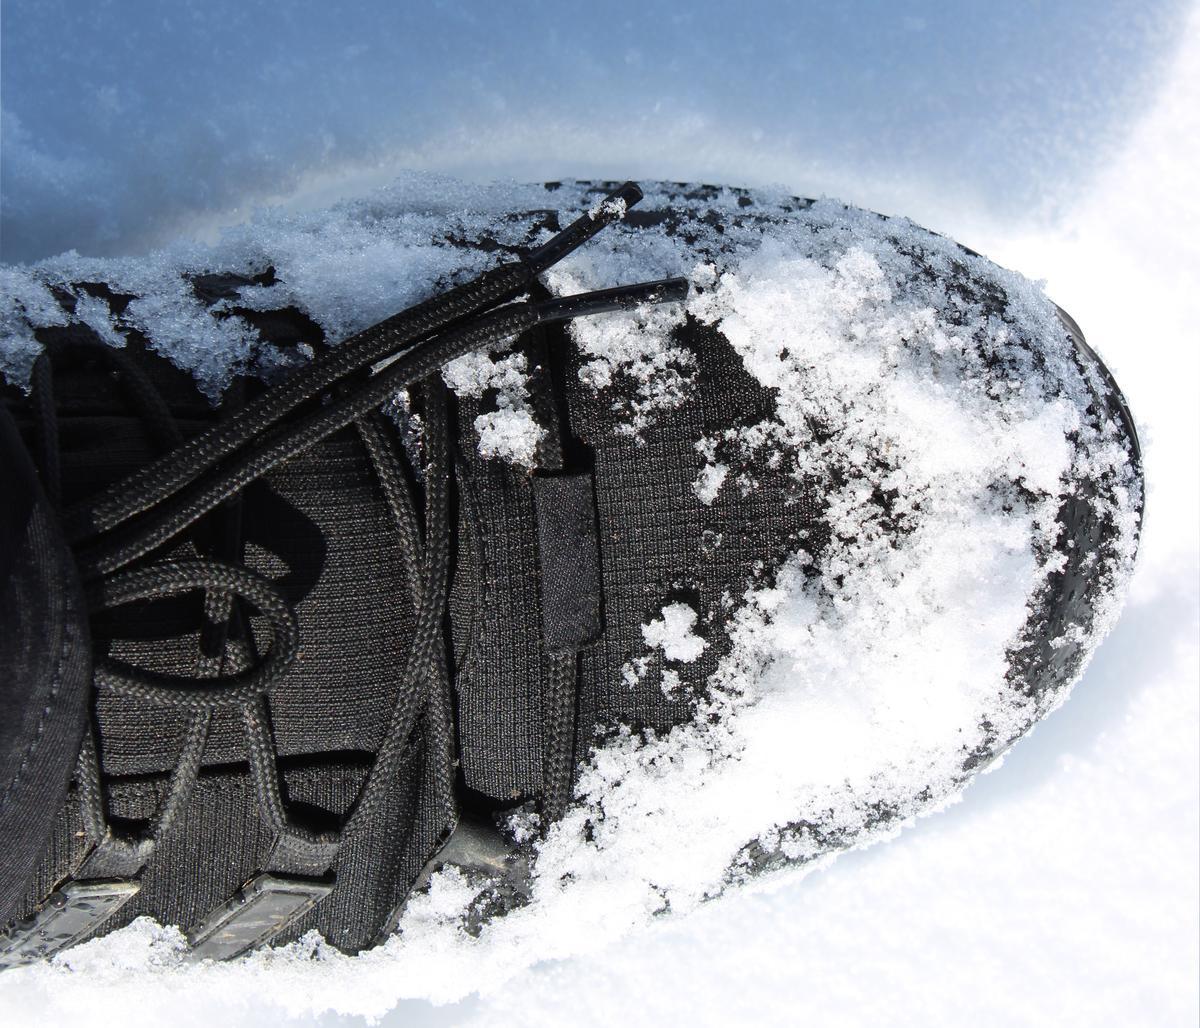 A technical shoe made using Pfoa, a substance capable of waterproofing the fabric. Photo by Noel Oviedo/Unsplash